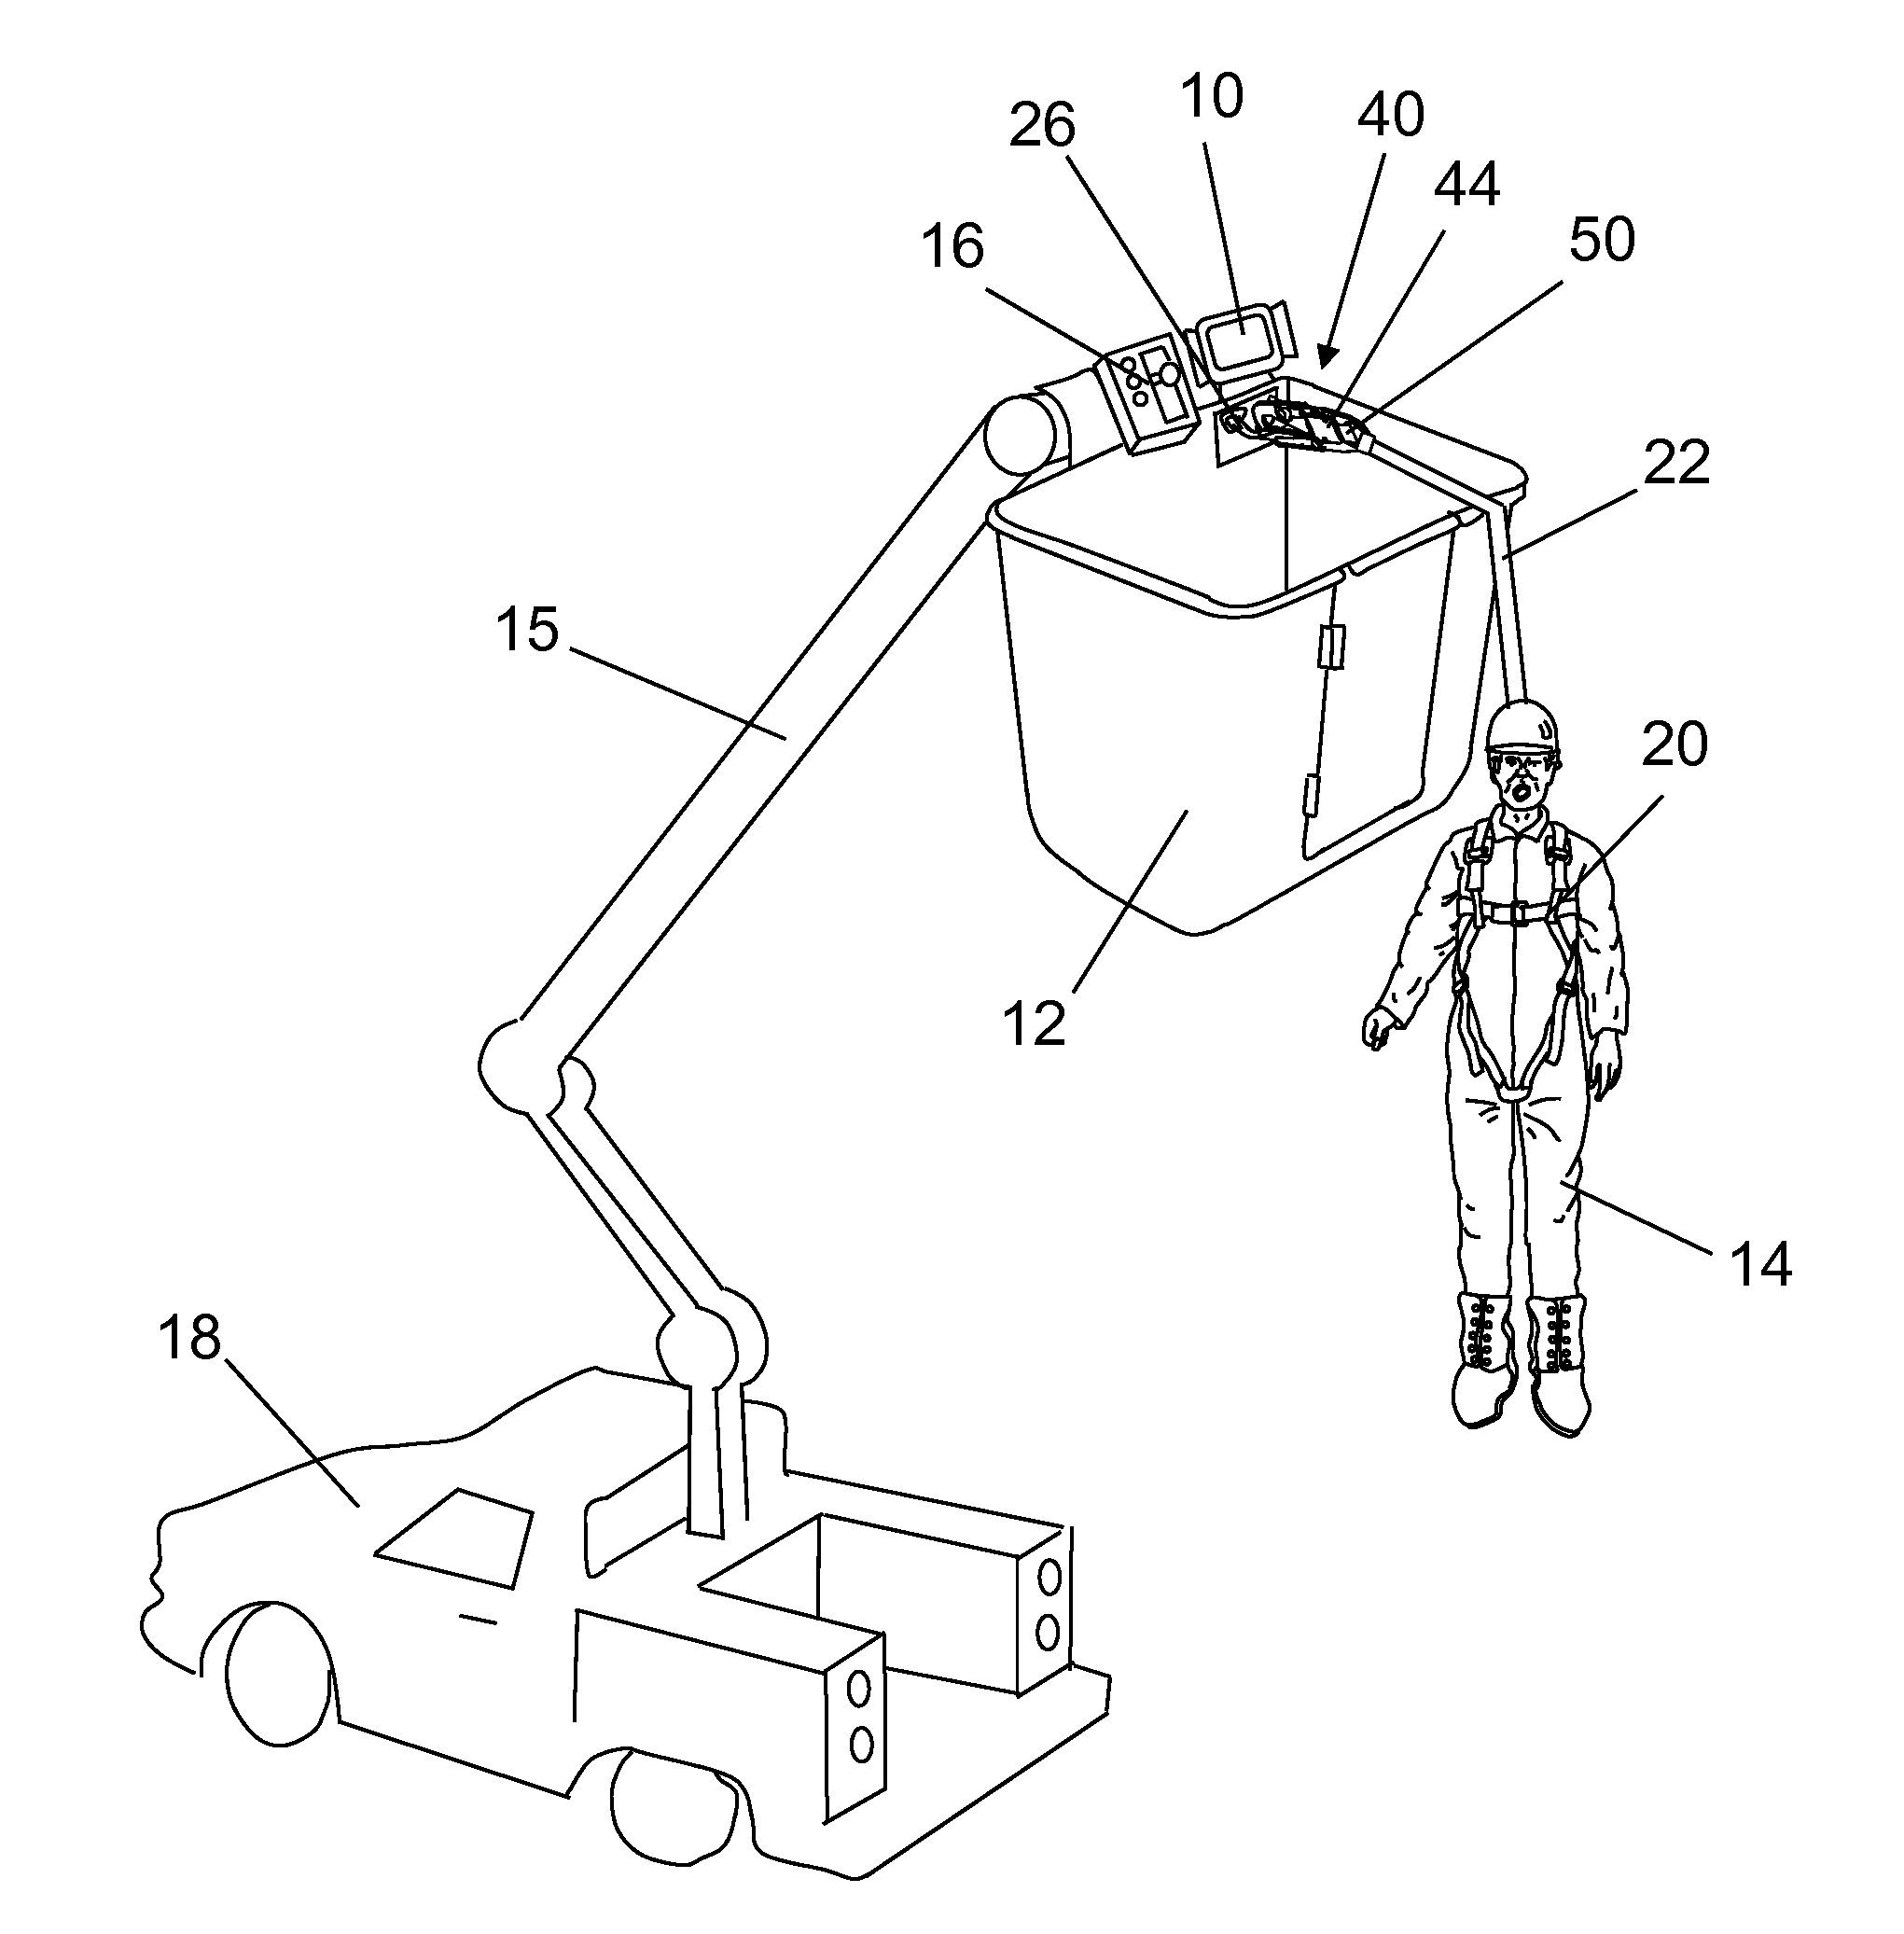 Warning and message delivery and logging system utilizable in a fall arresting and prevention device and method of same